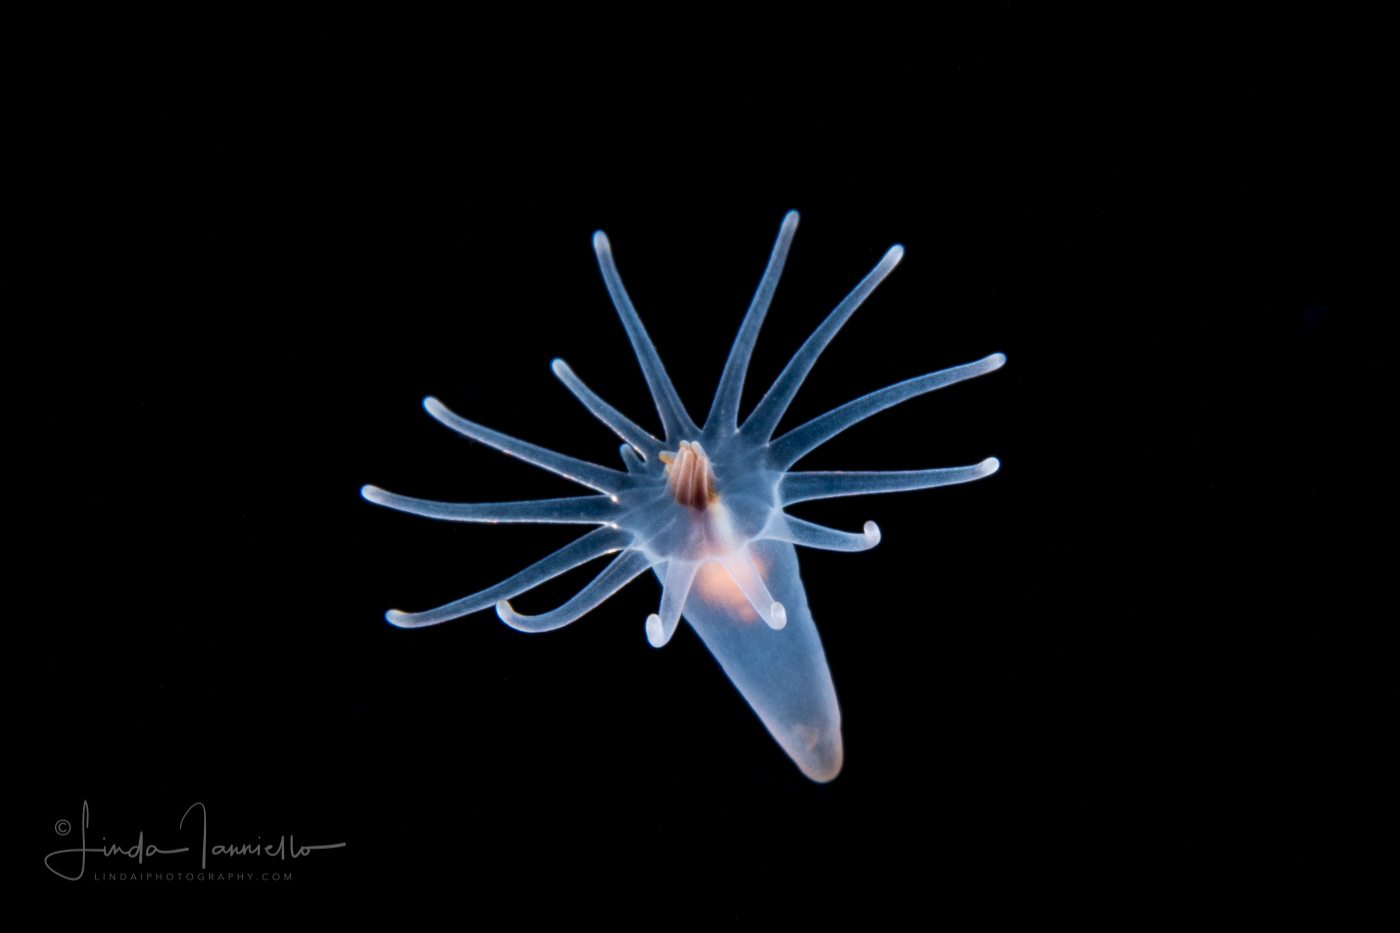 Pelagic Larval Stage of a Tube Anemone